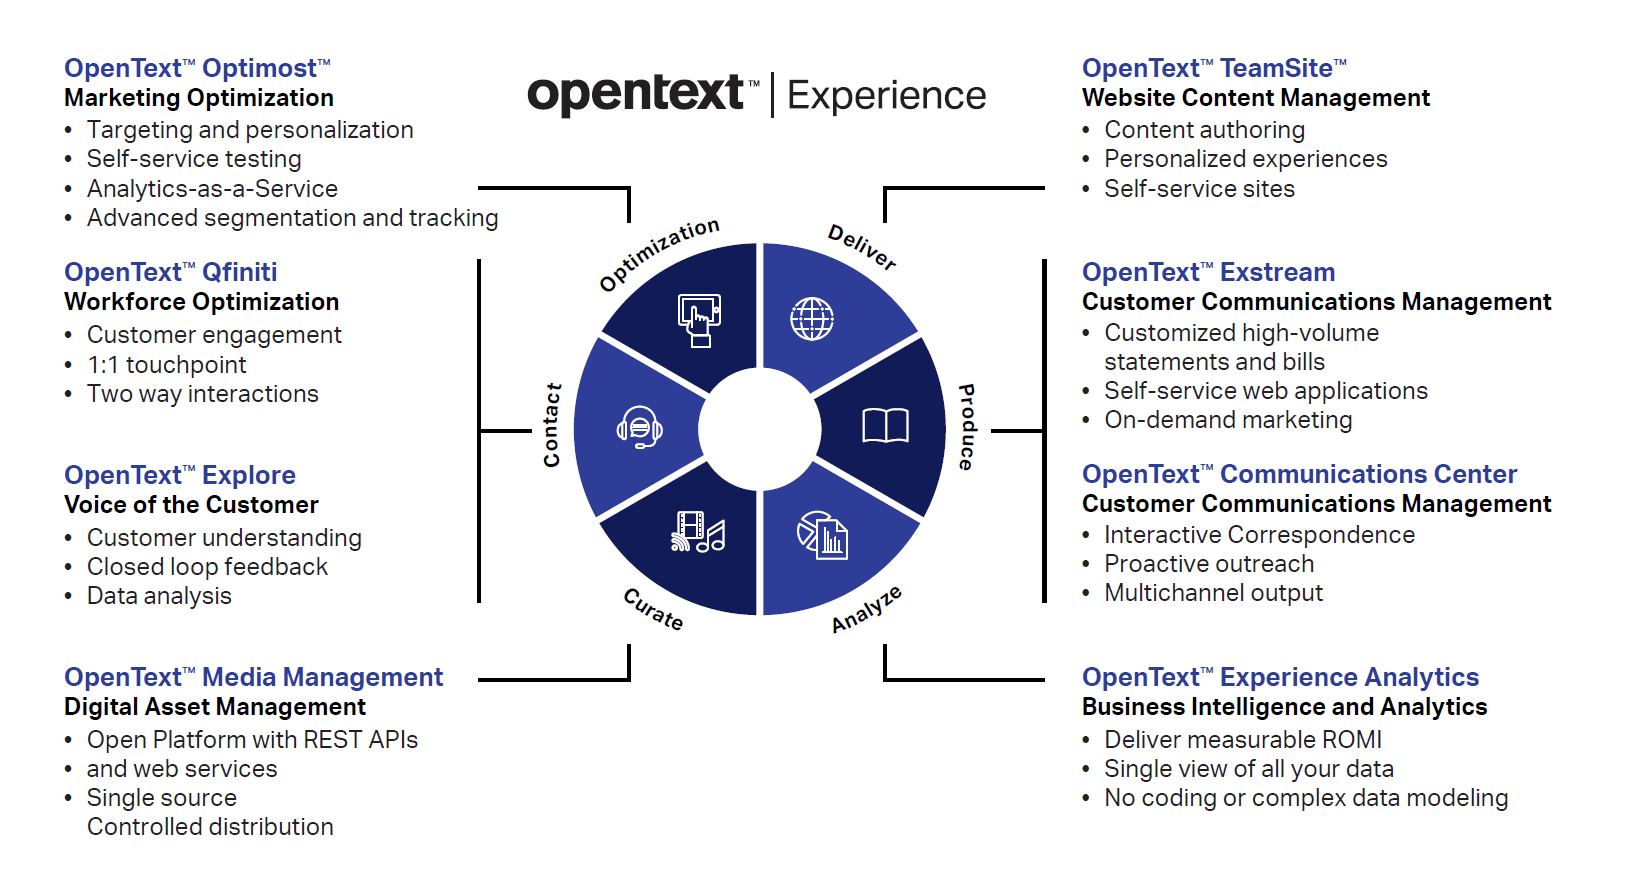 exstream experience products